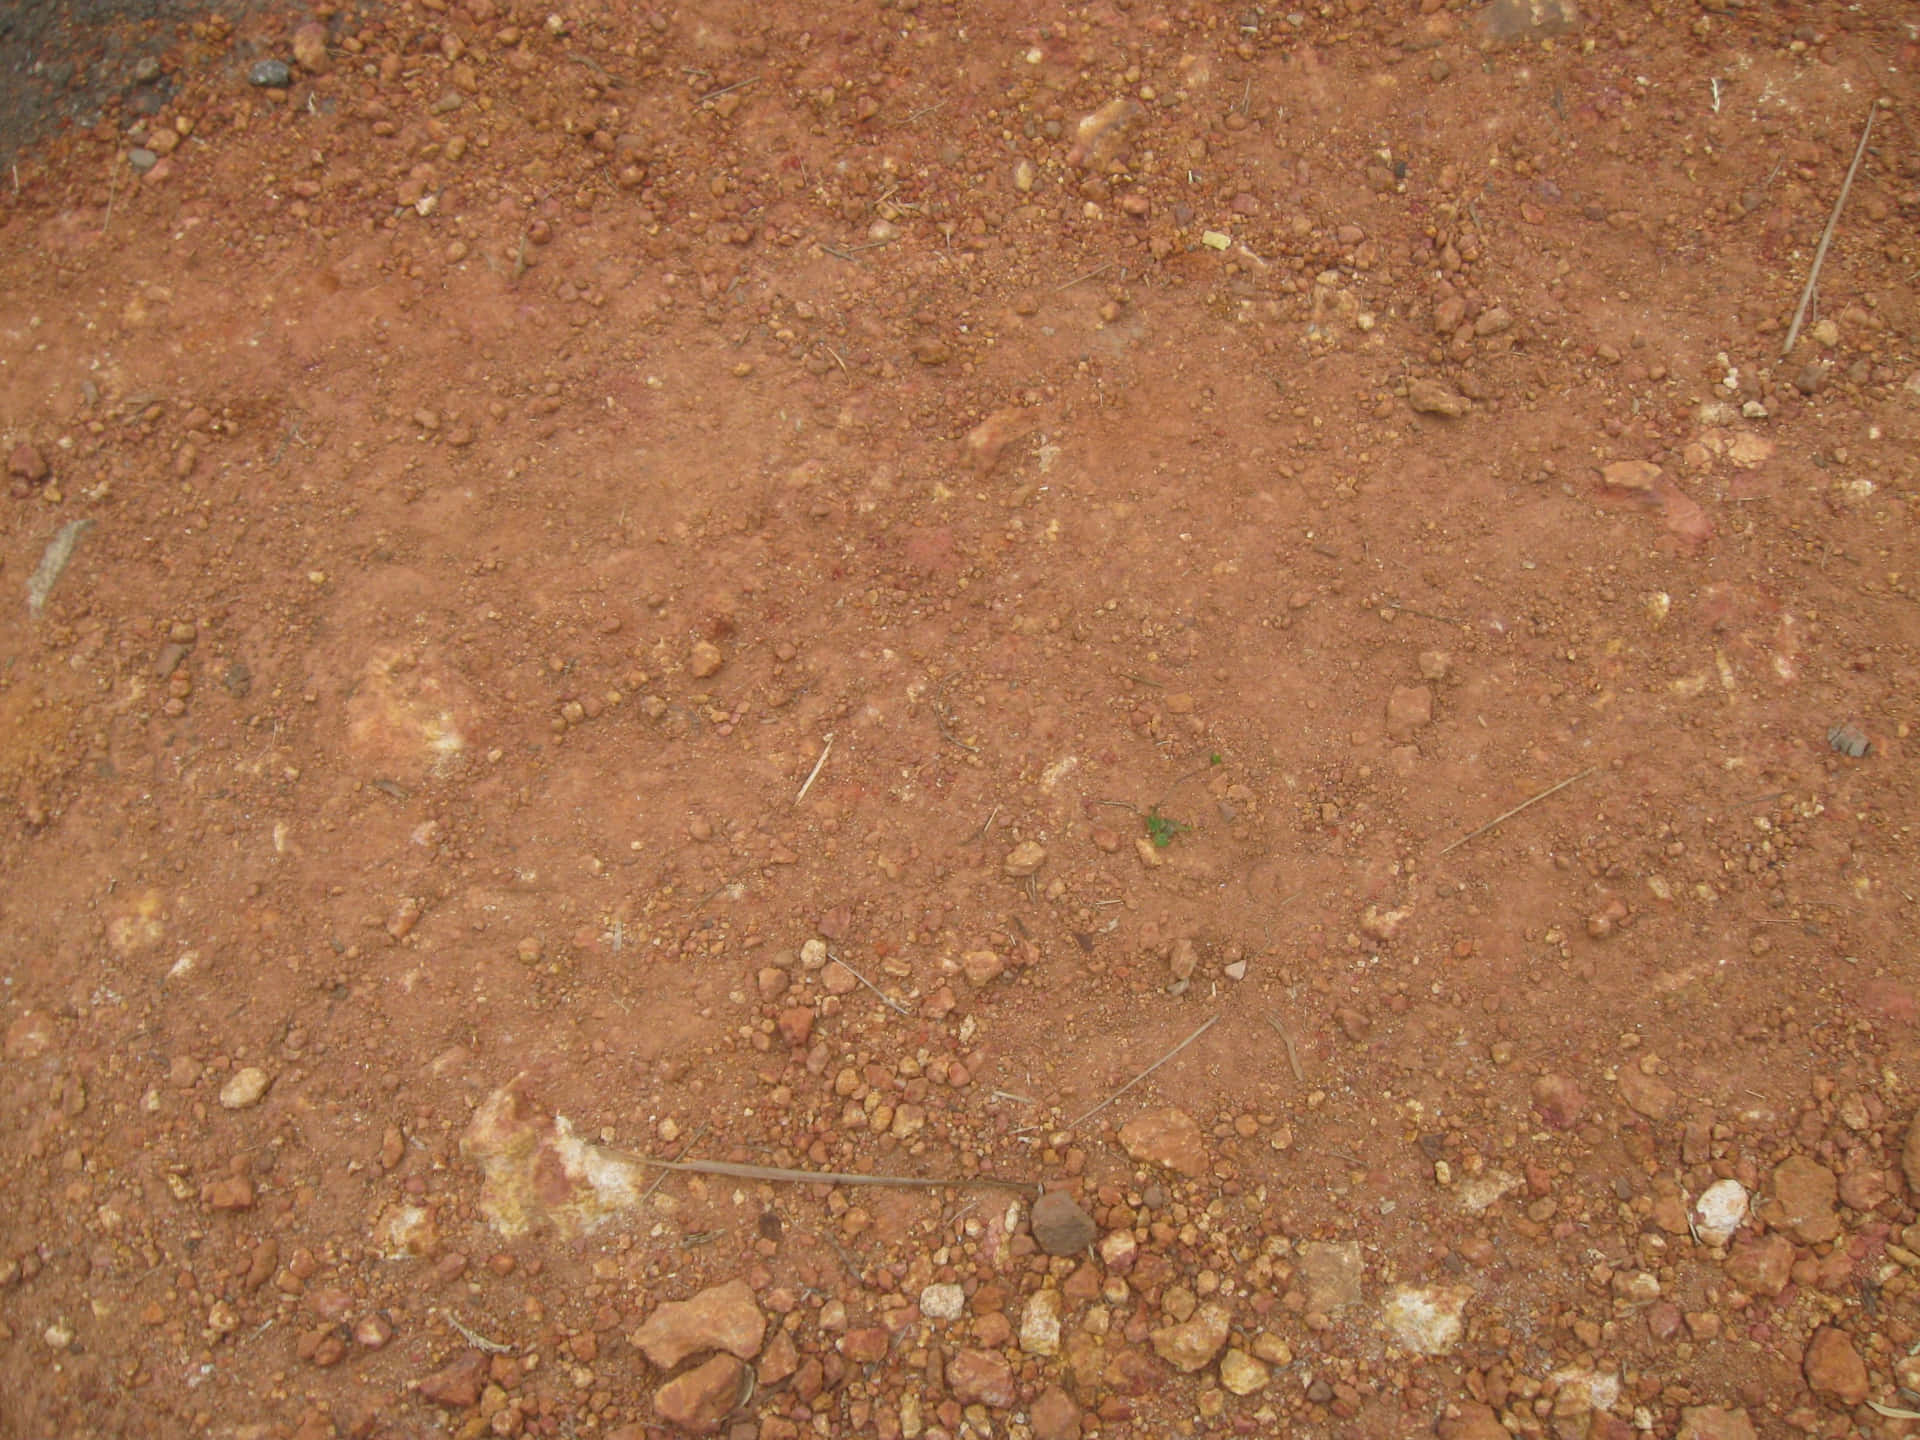 A close up view of brown dirt